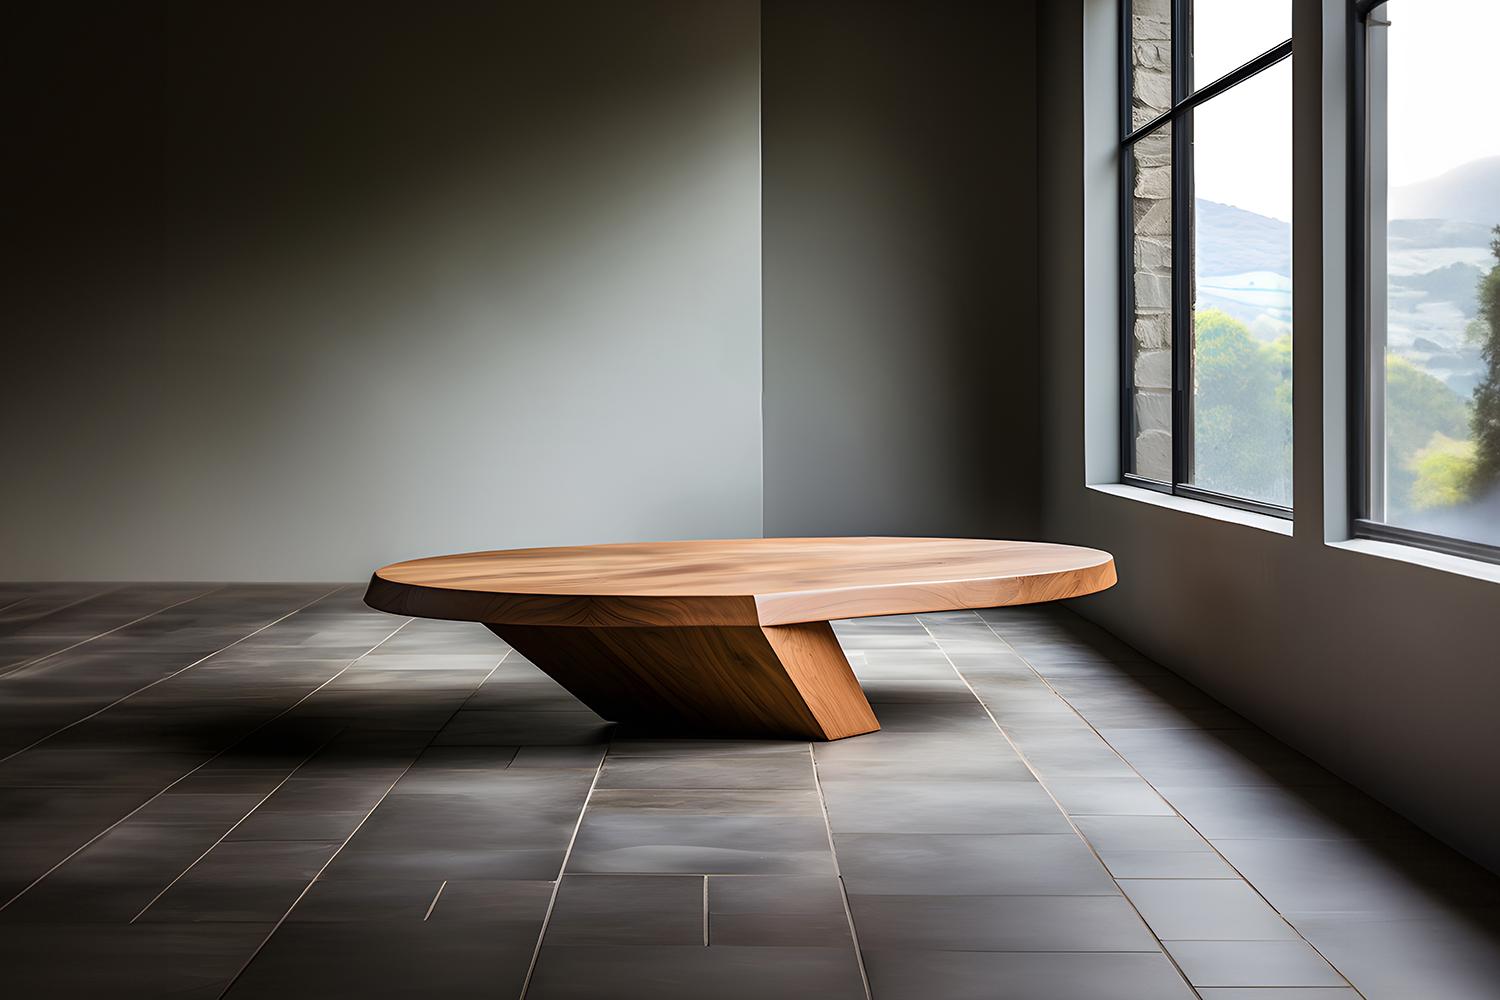 Sculptural Coffee Table Made of Solid Wood, Center Table Solace S26 by Joel Escalona


The Solace table series, designed by Joel Escalona, is a furniture collection that exudes balance and presence, thanks to its sensuous, dense, and irregular